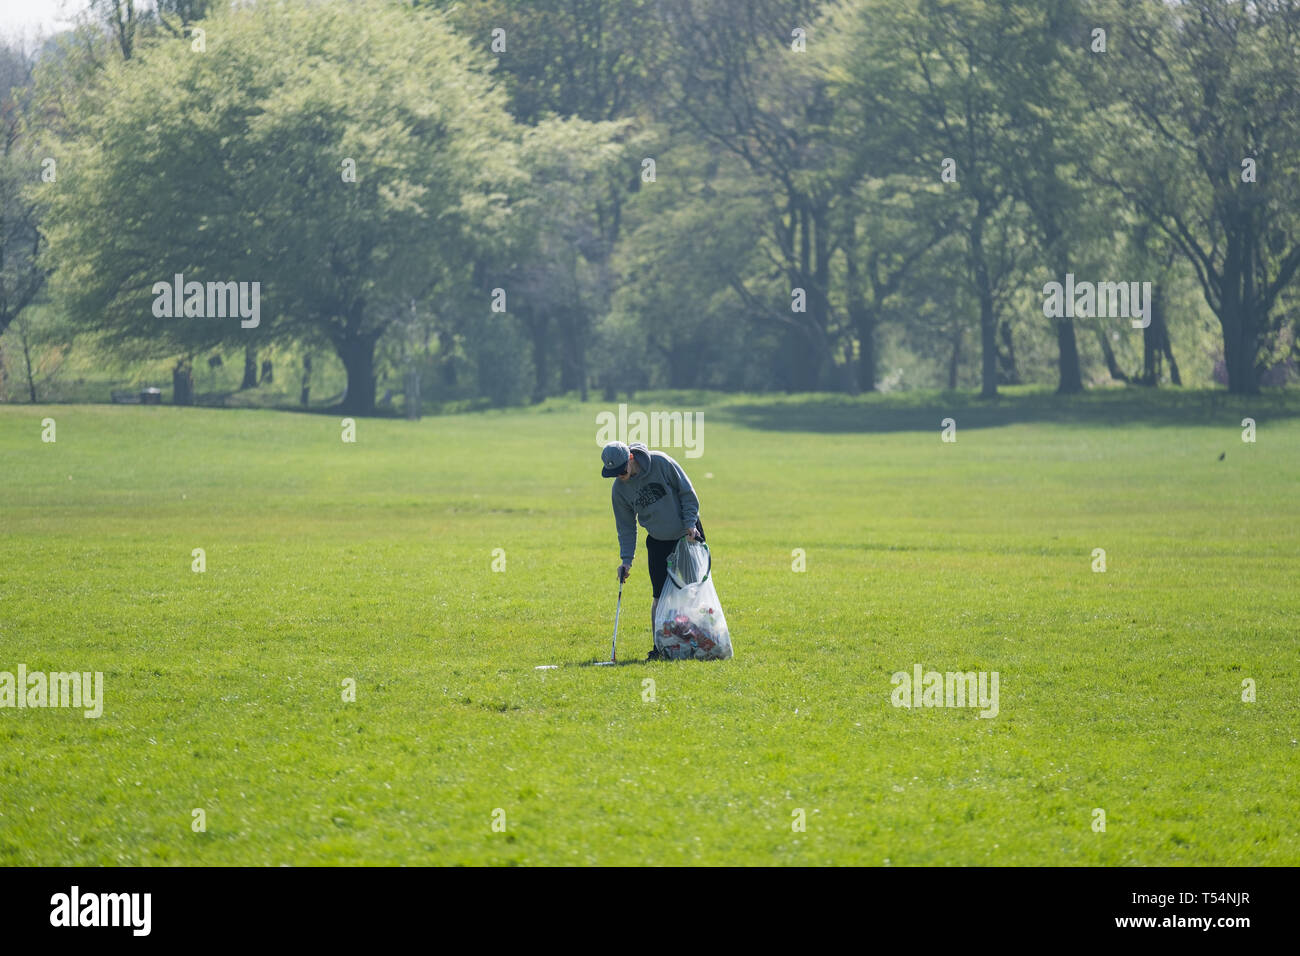 Sefton Park, Liverpool, UK. April 21, 2019. A small group of people picking up litter in Sefton Park, Liverpool in the north west of England on Sunday, April 21, 2019. Credit: Christopher Middleton/Alamy Live News Stock Photo